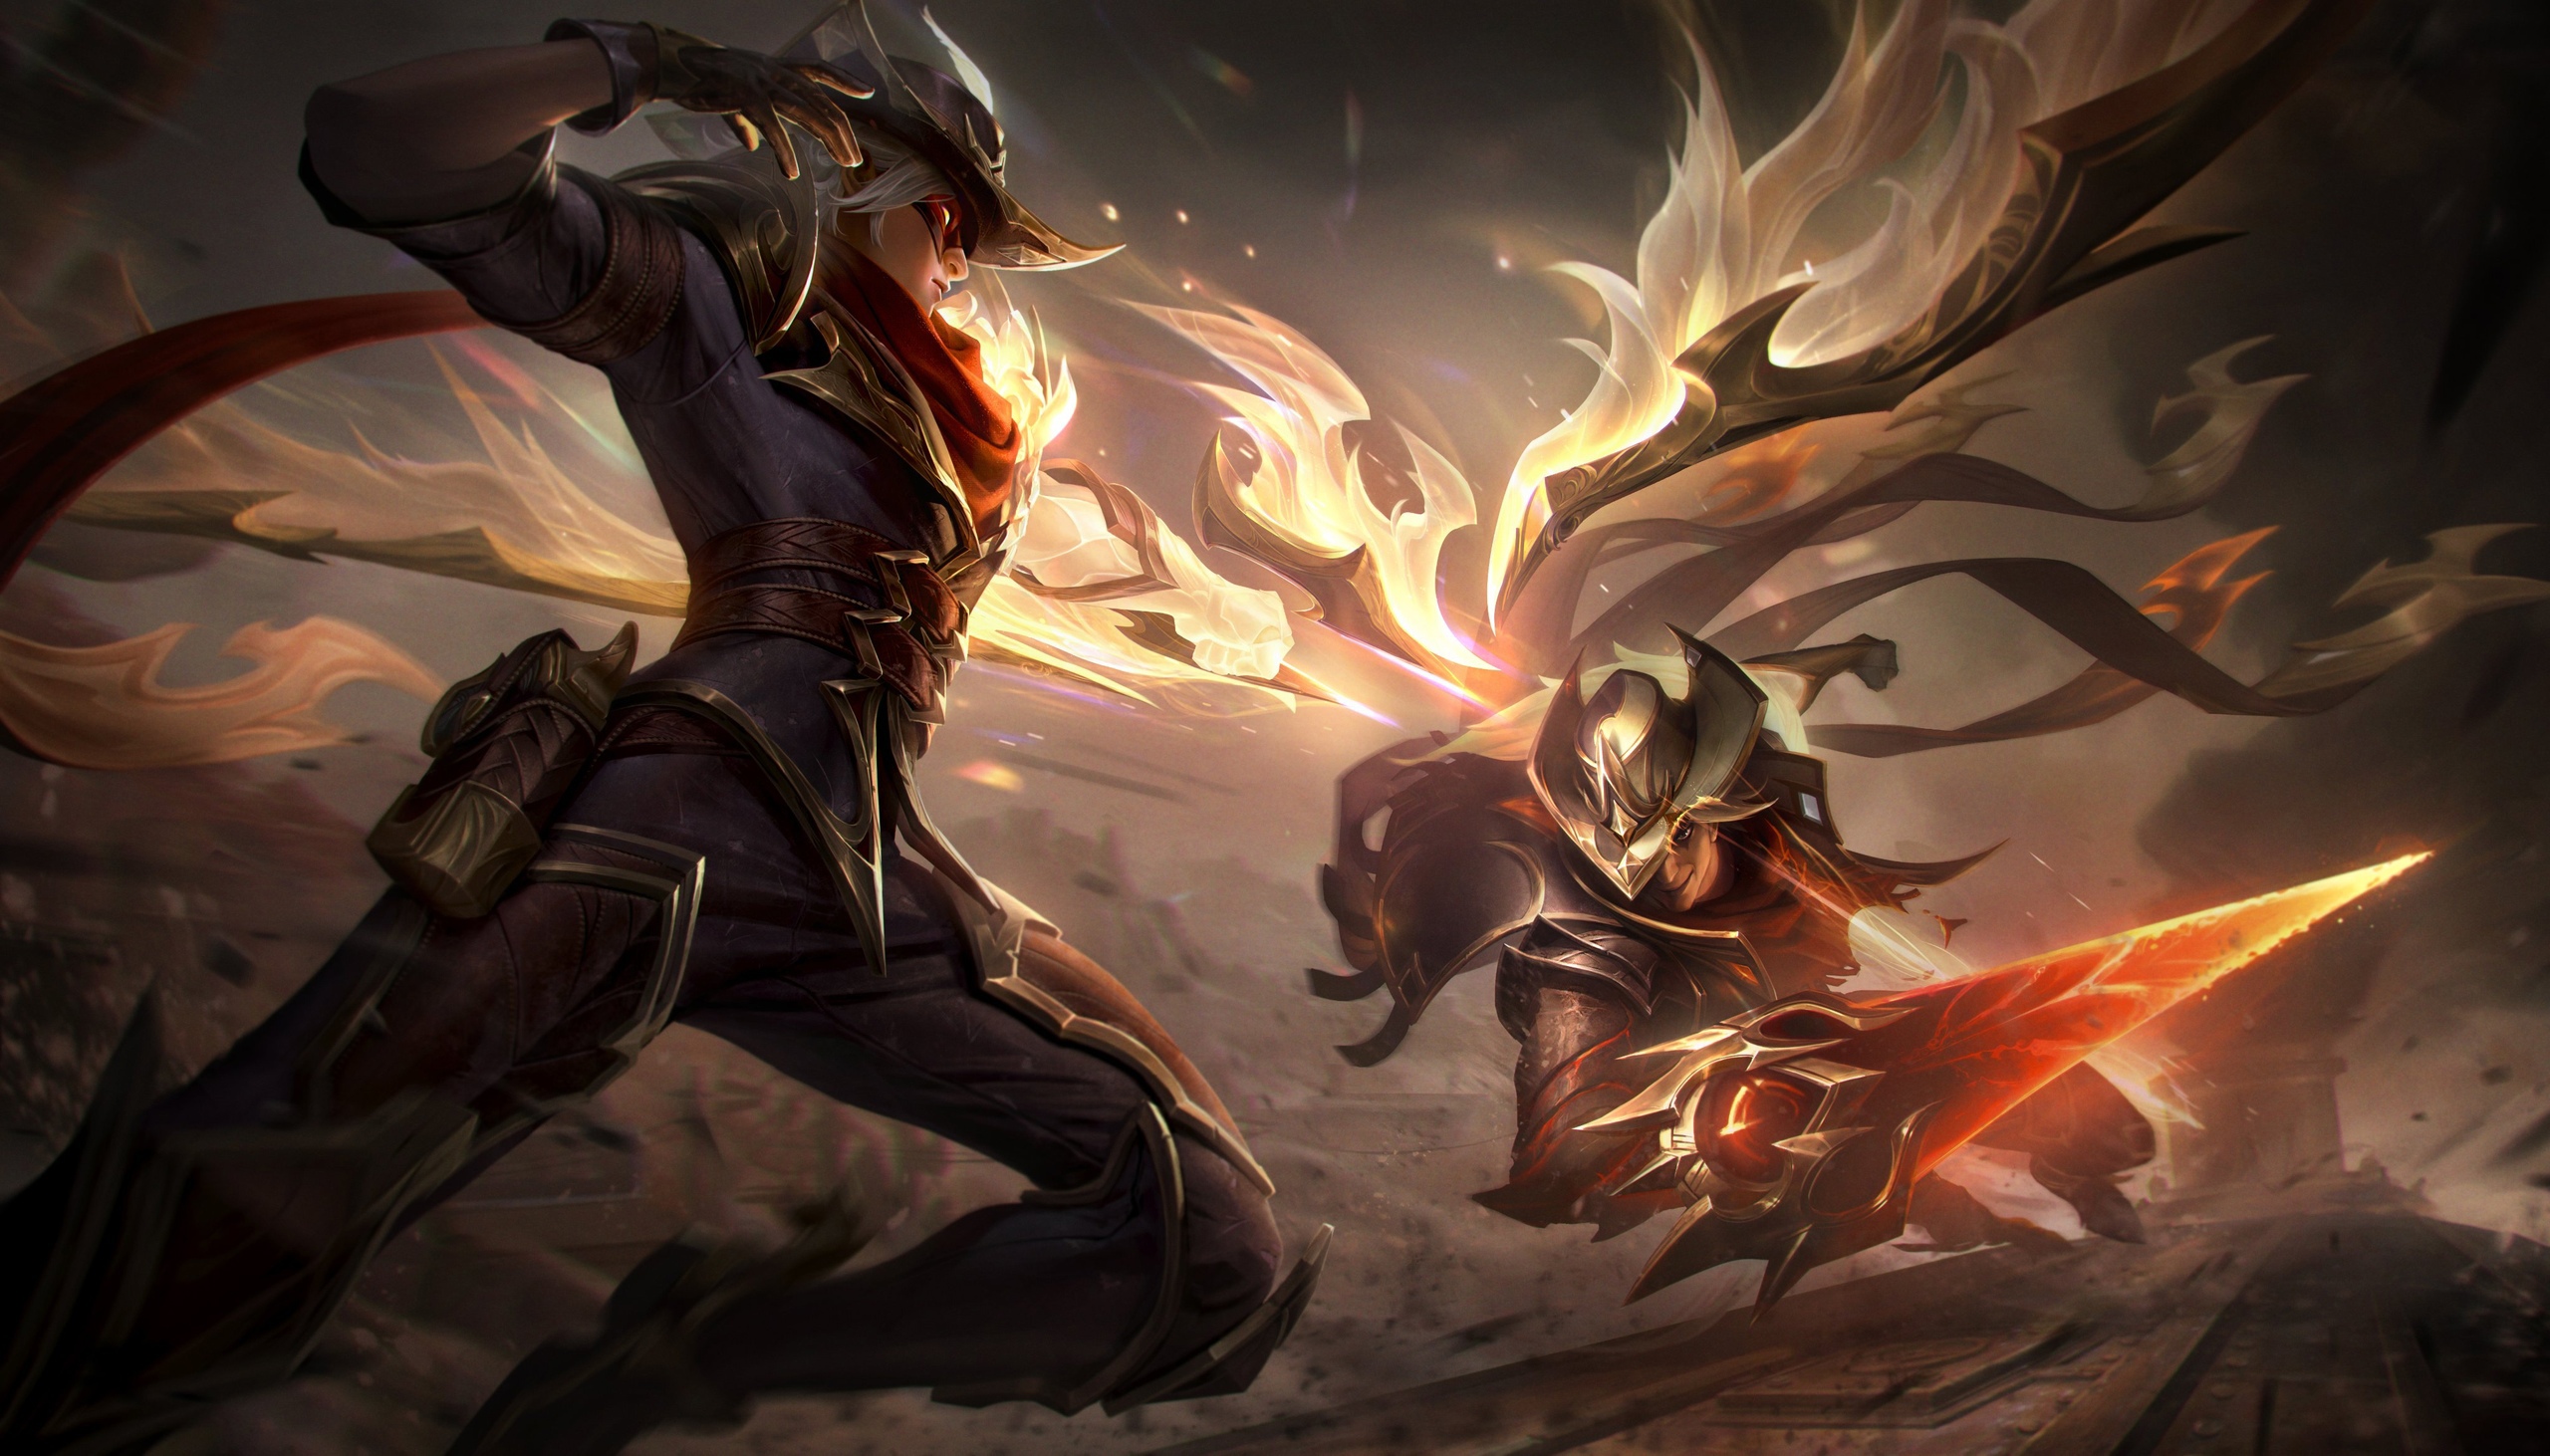 20 Talon League Of Legends HD Wallpapers and Backgrounds